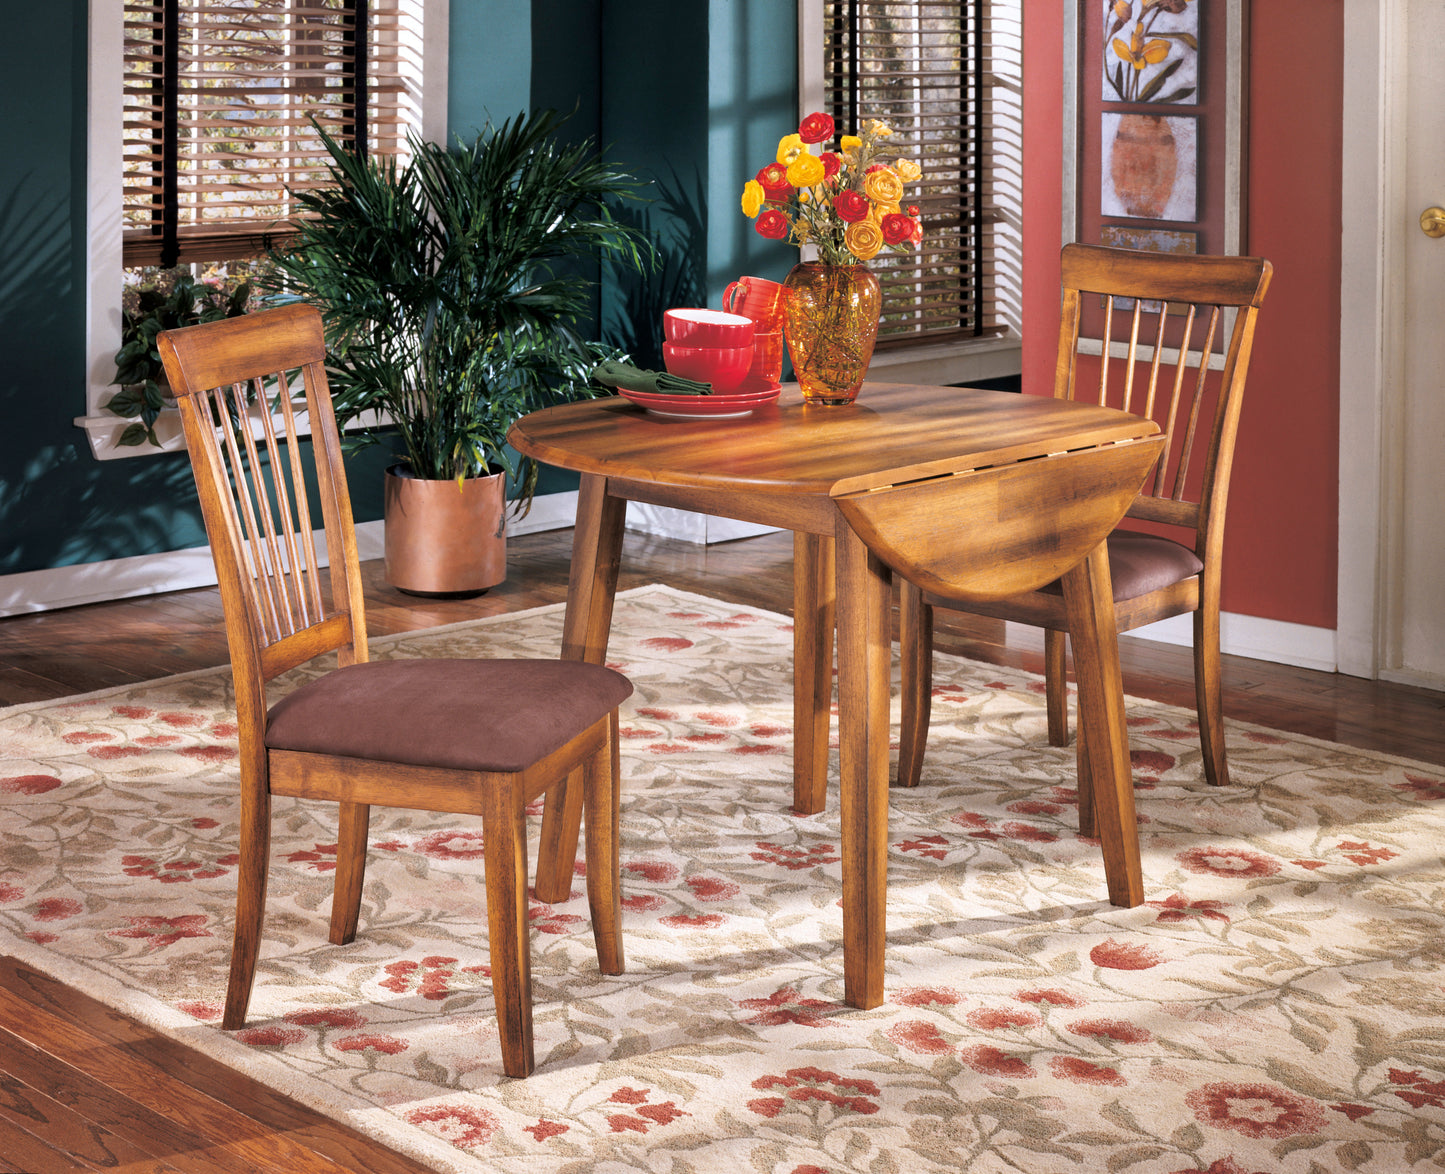 Berringer Dining Drop Leaf Table and Two Chairs